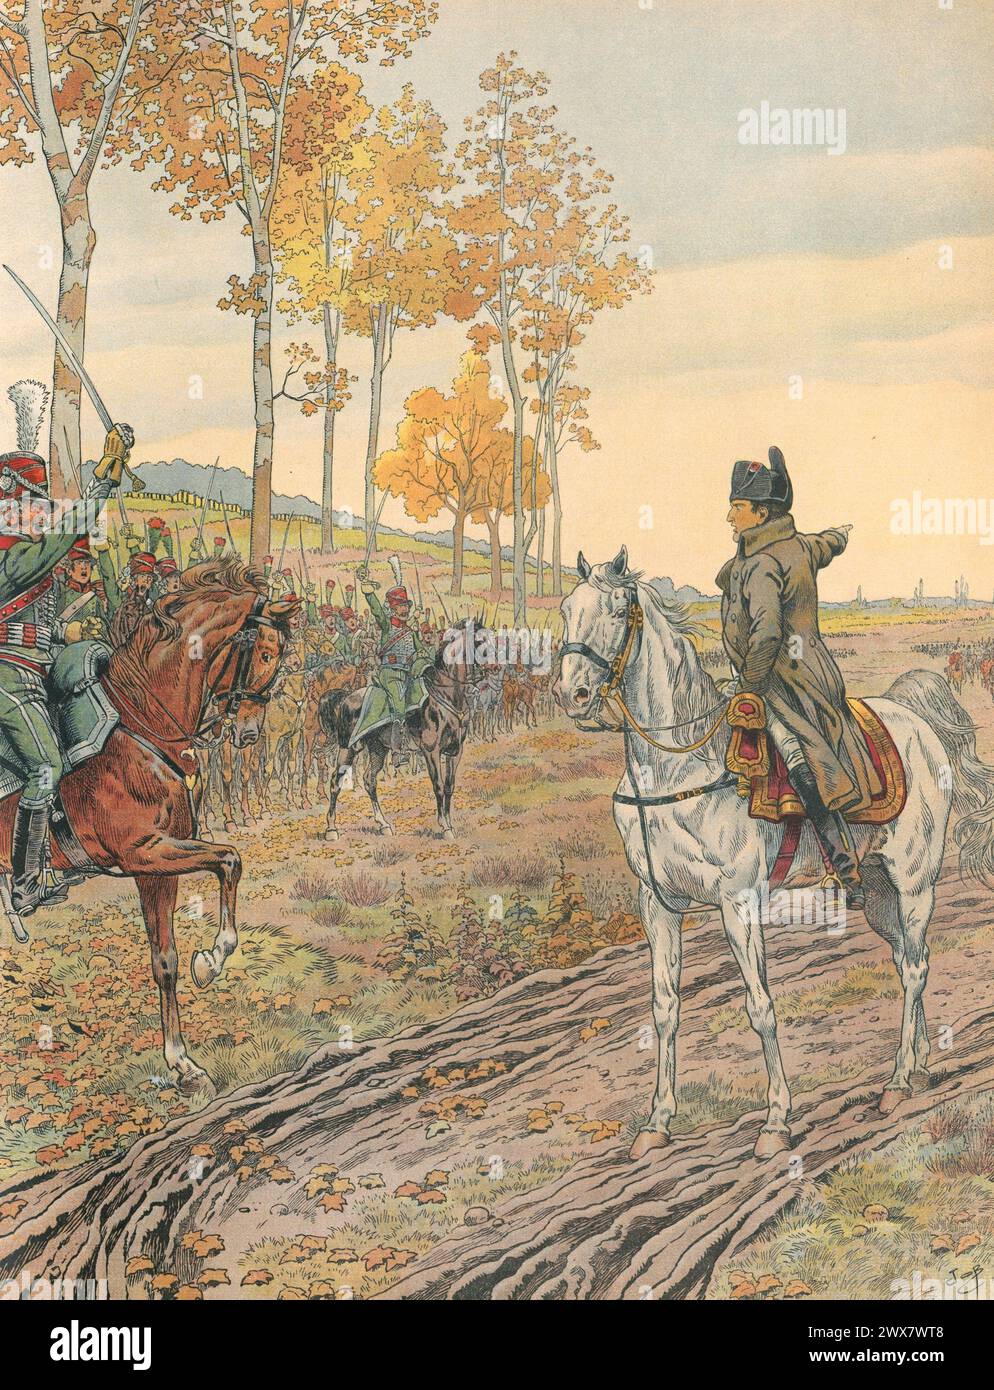 Prussia asking Napoleon I to leave Germany after the victory of the Grande Armée at Austerlitz in December 1805.  Illustration by Job from the book 'Napoléon' written by Georges Montorgueil, published in 1921 by Boivin (Paris). Stock Photo